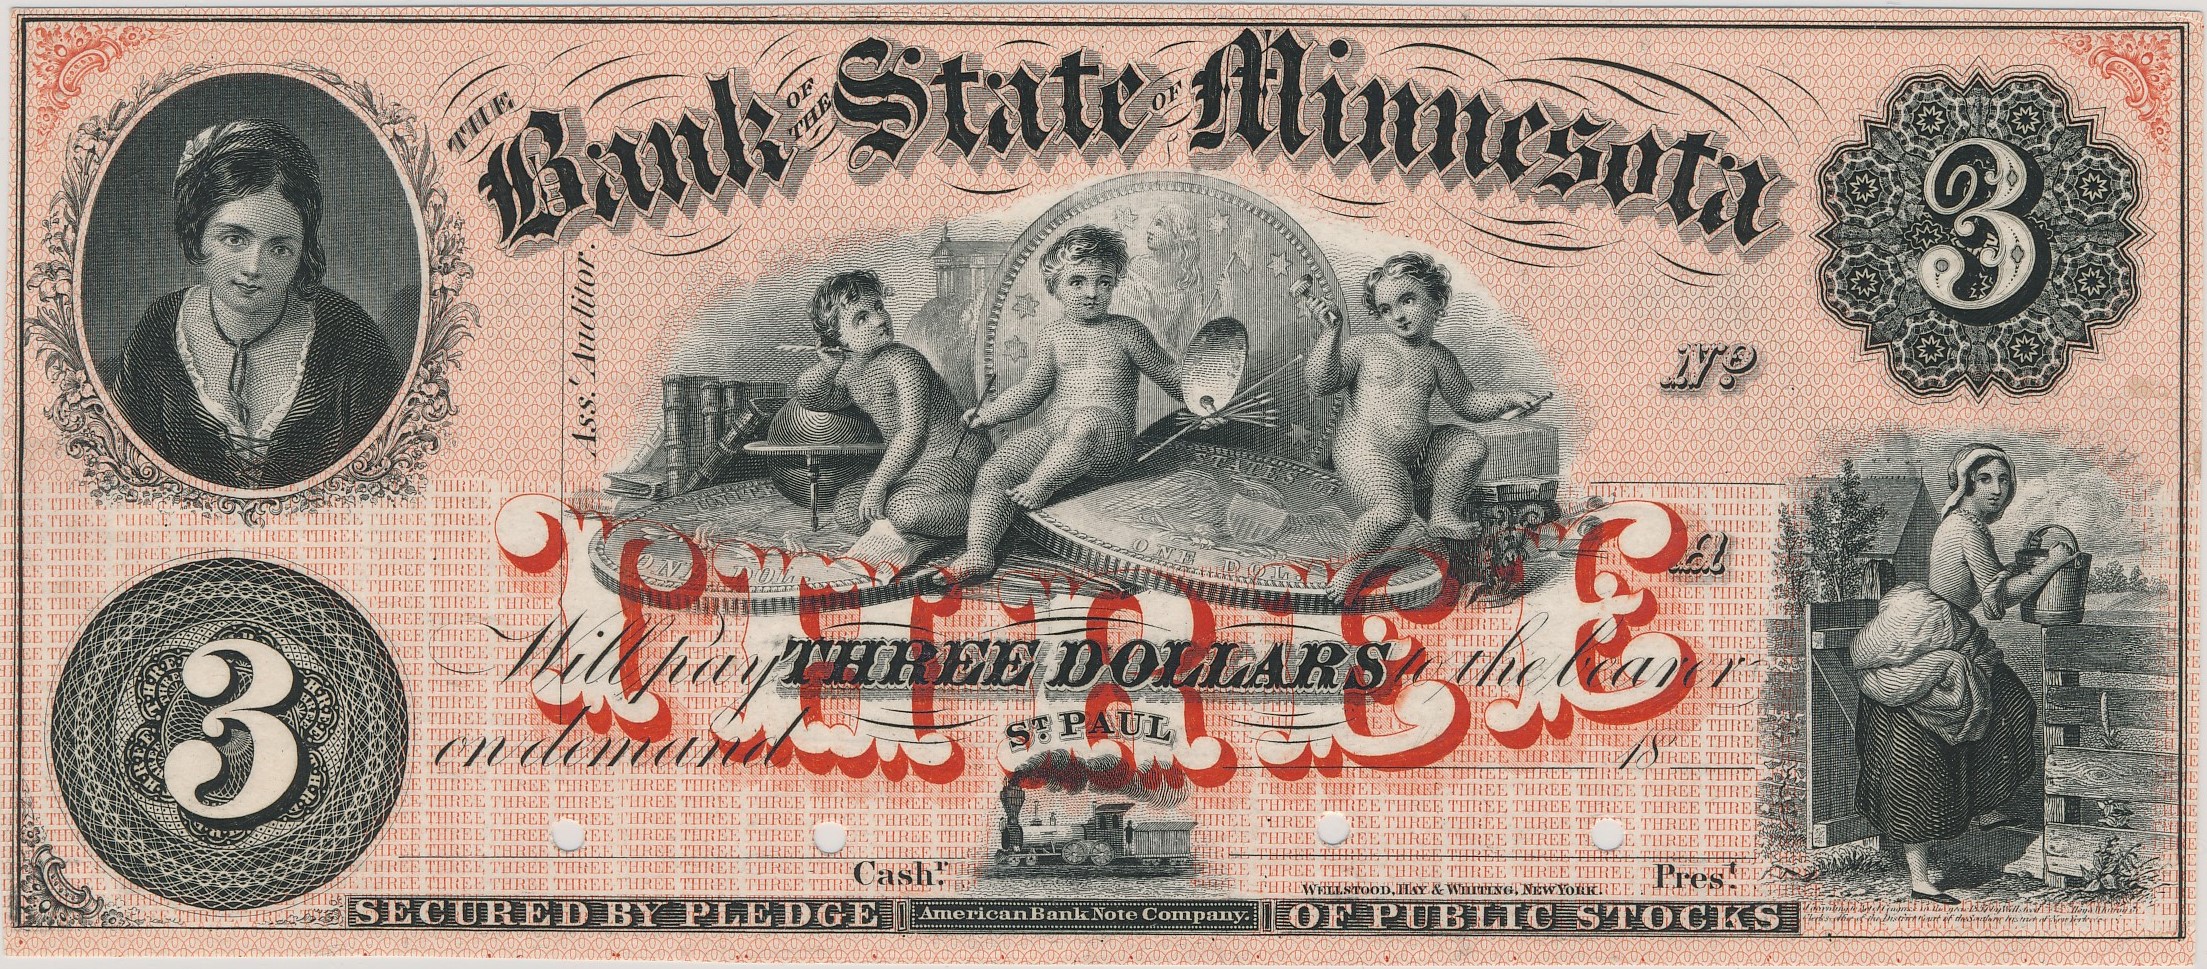 $3 Bank of the State of Minnesota